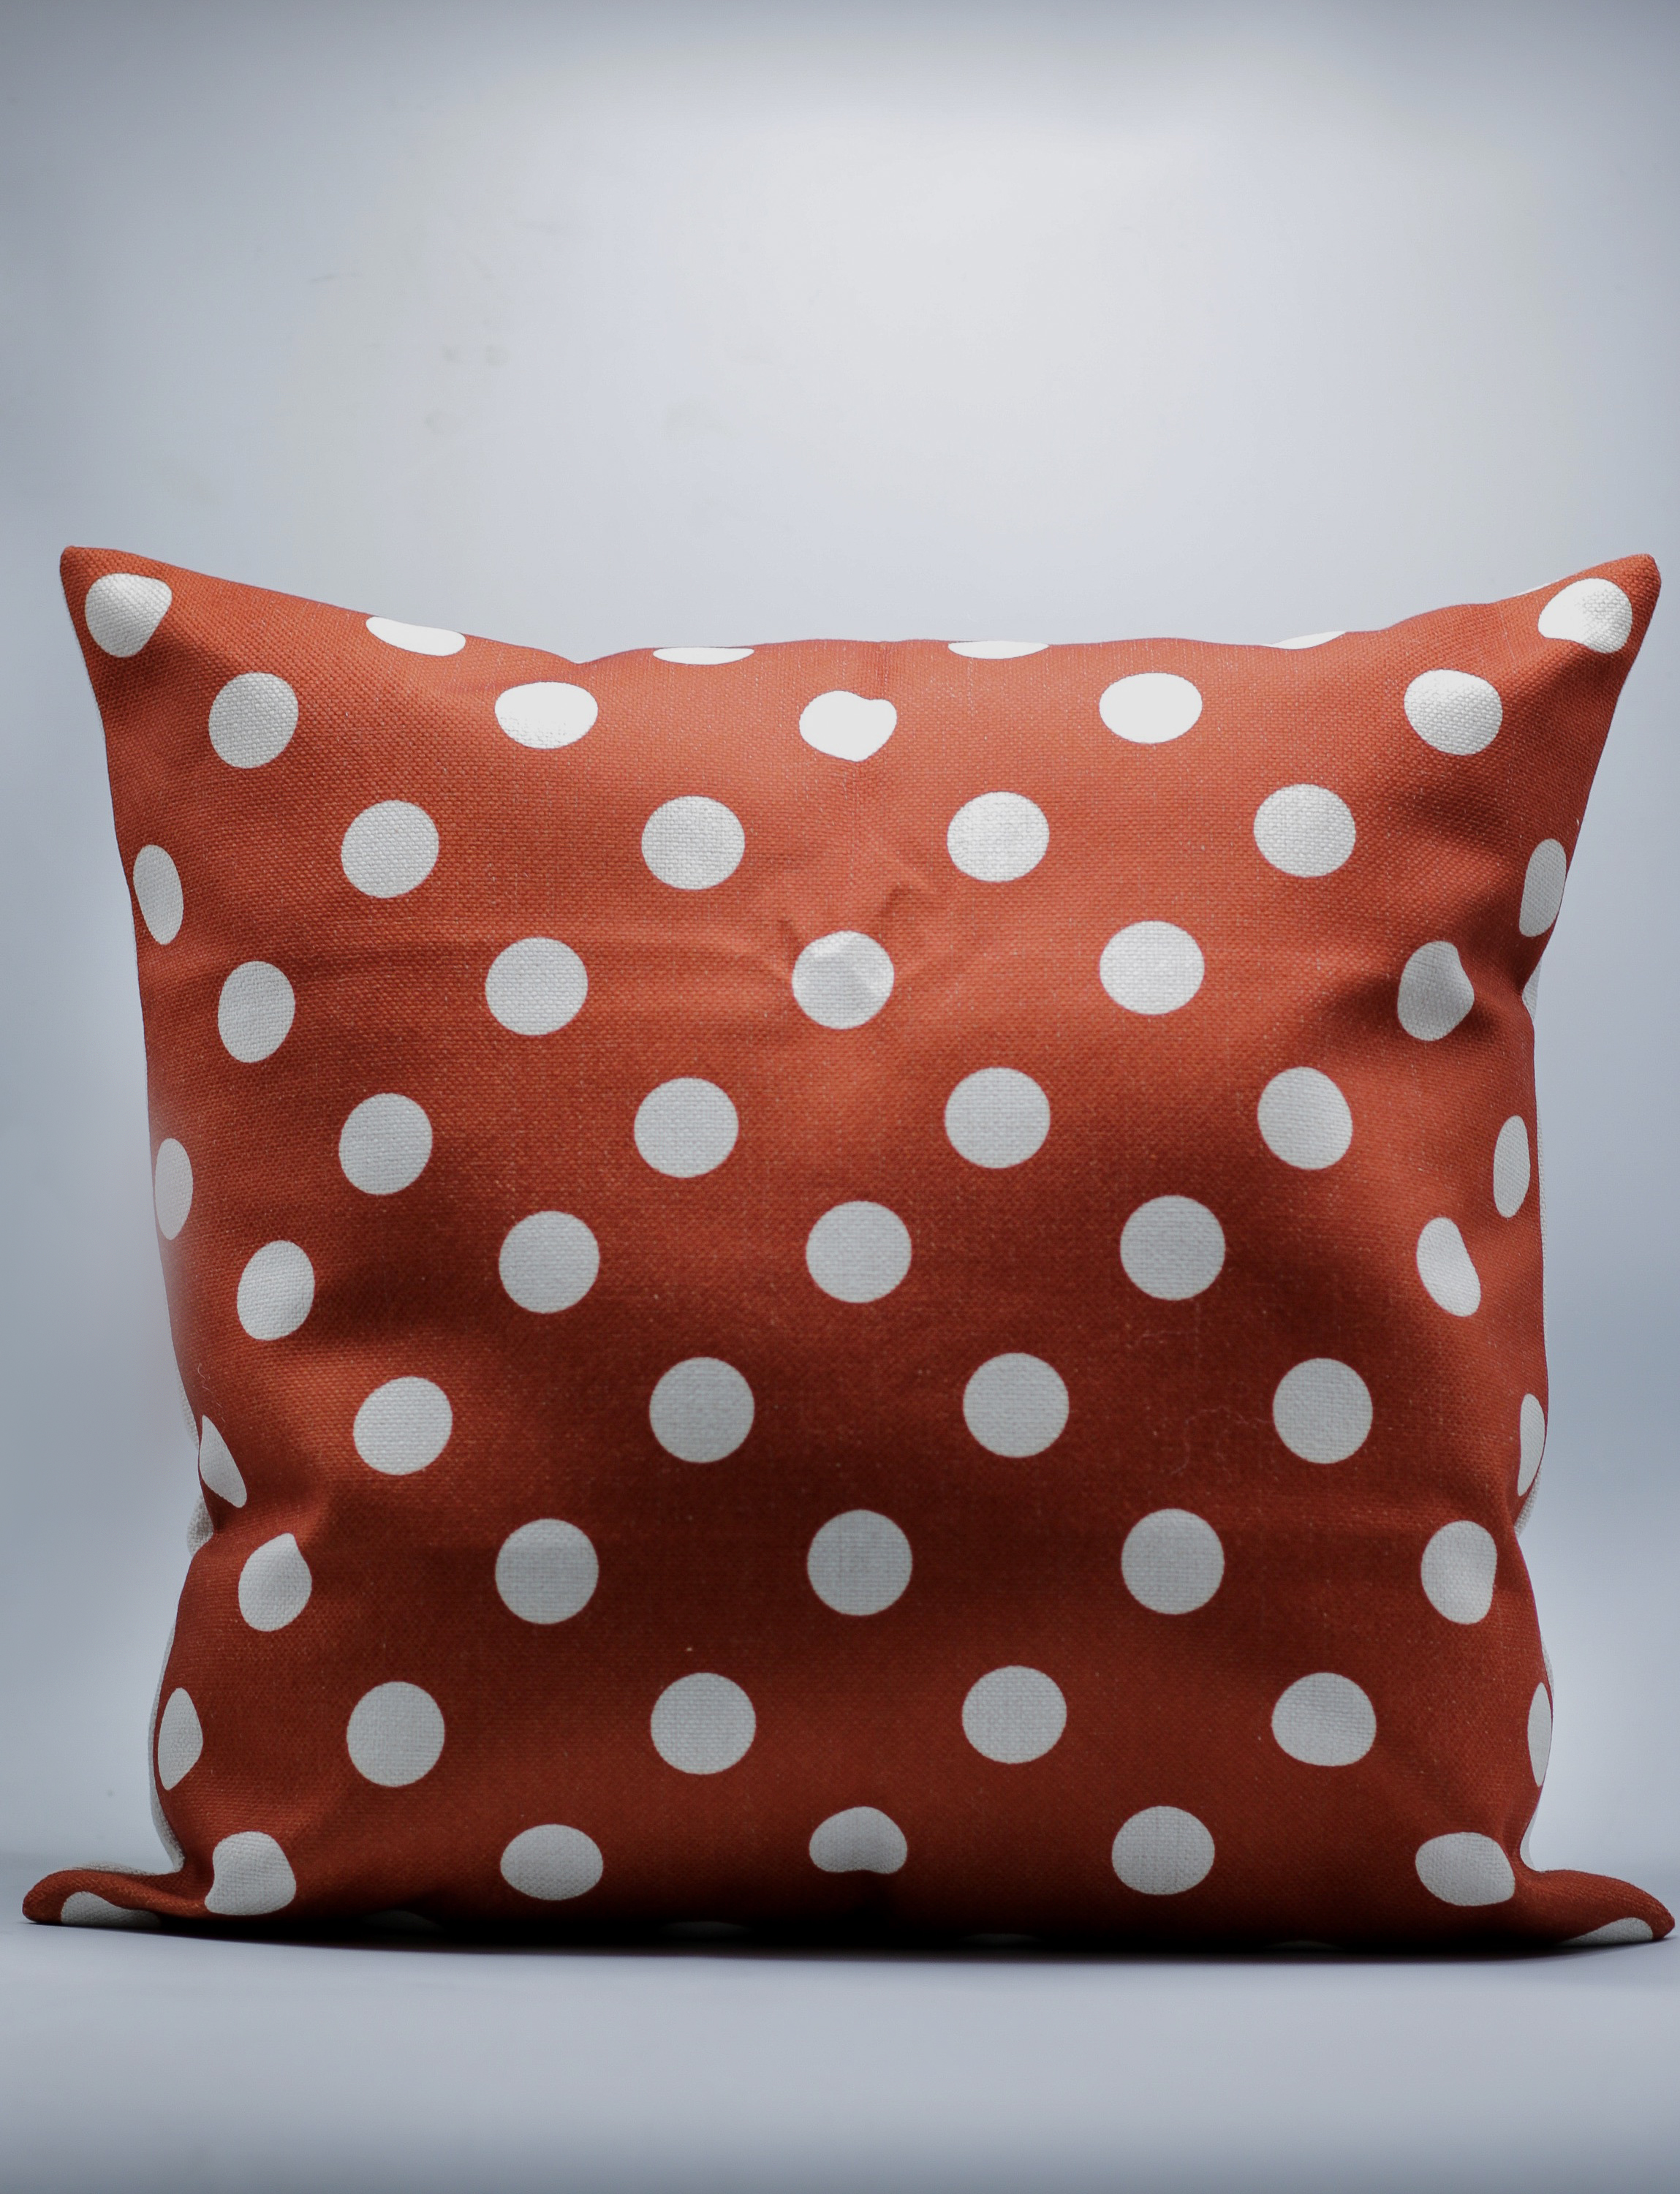 Red/Burgundy Polka Dot Decorative Throw Pillow Cover